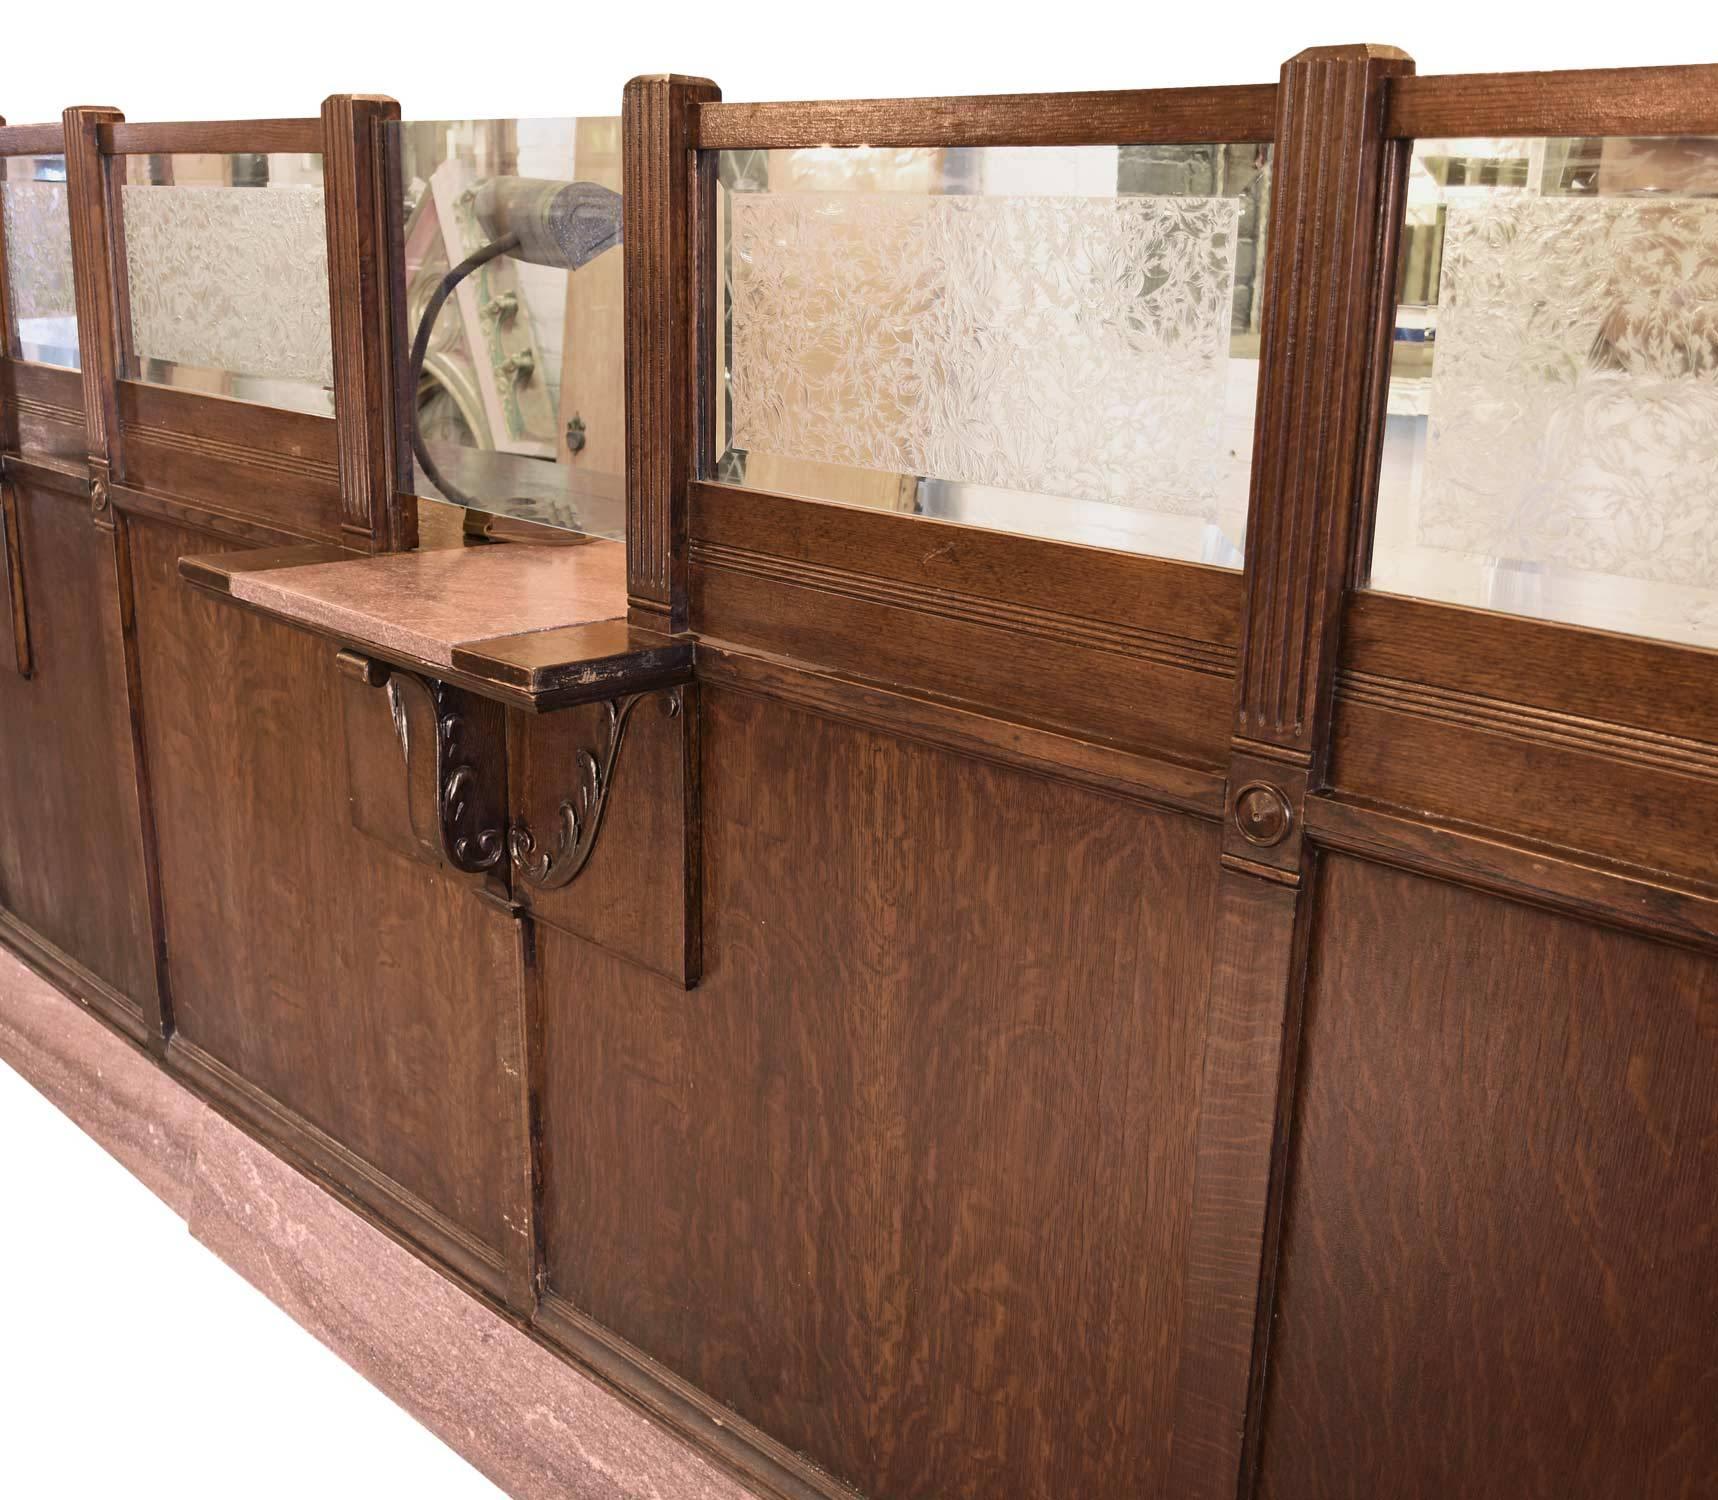 This original turn-of-the-century bank teller counter exhibits a lovely combination of materials, in oak, glass and granite.  On the front of the counter, two teller windows are created with clear glass and salmon colored granite and are surrounded